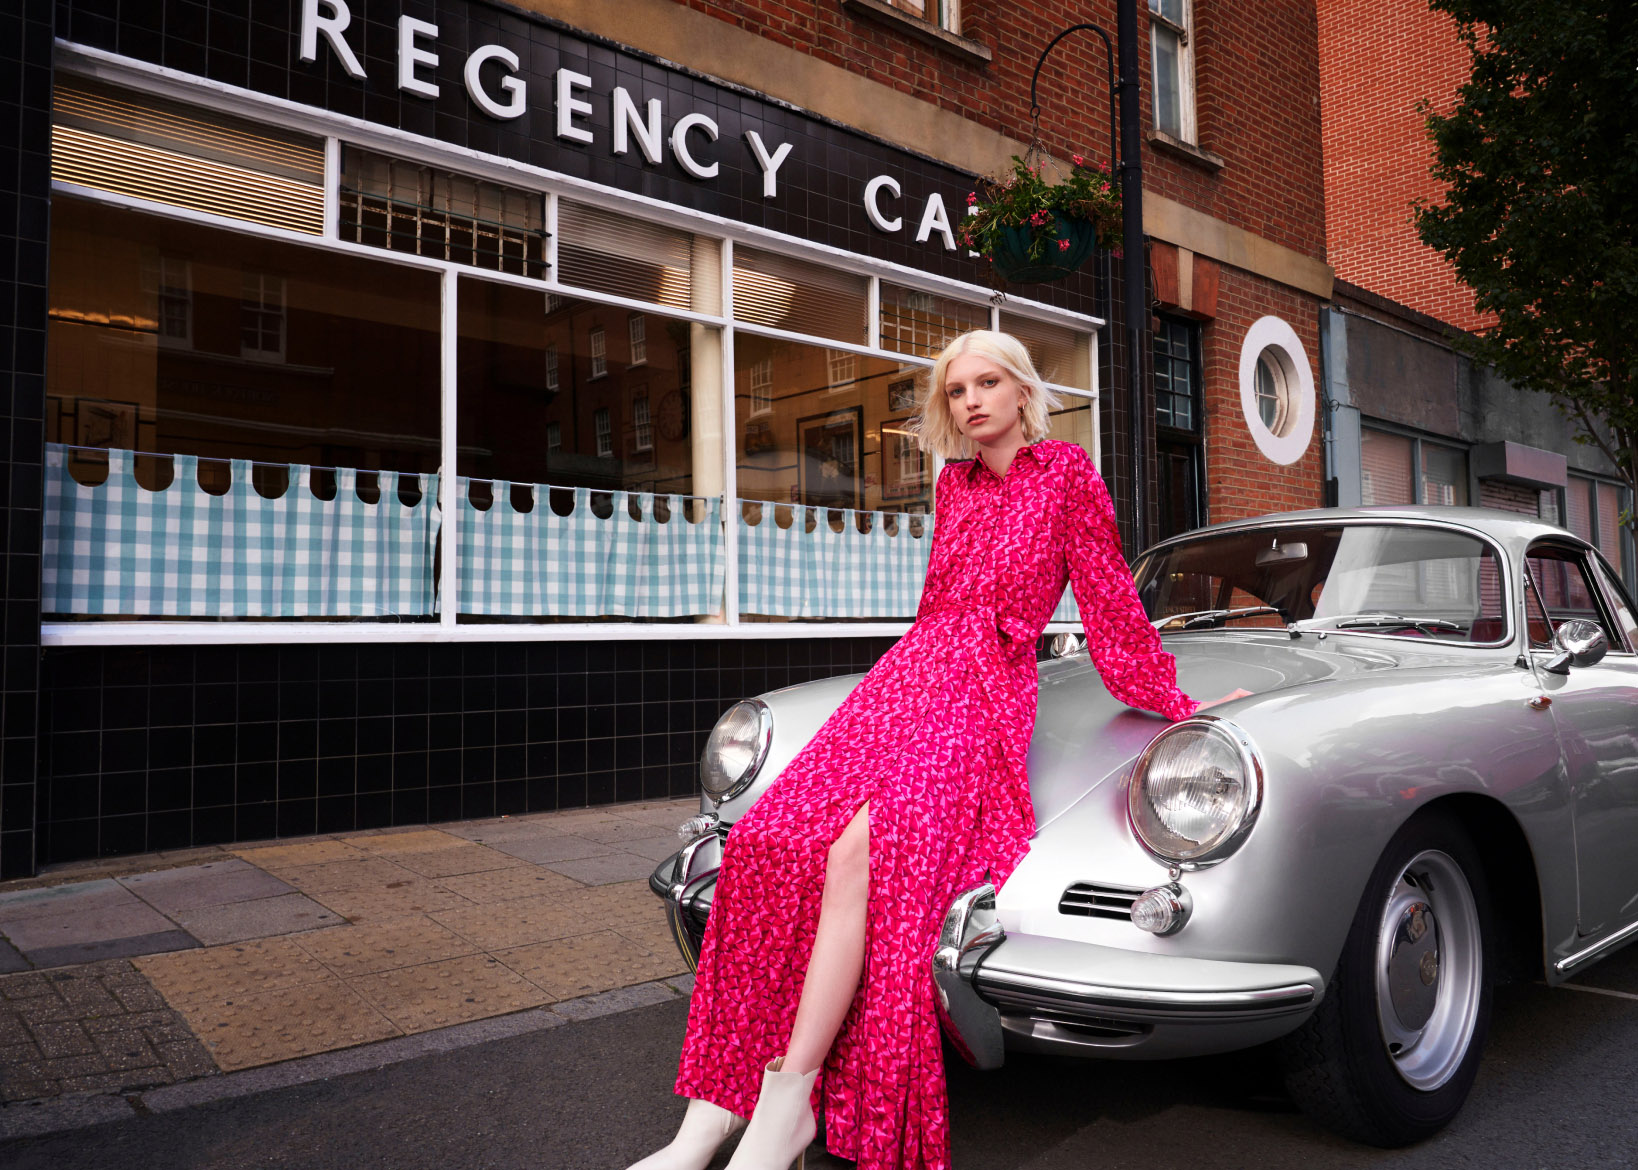 Model photographed lounging on a silver car wearing a pink patterned shirt dress.